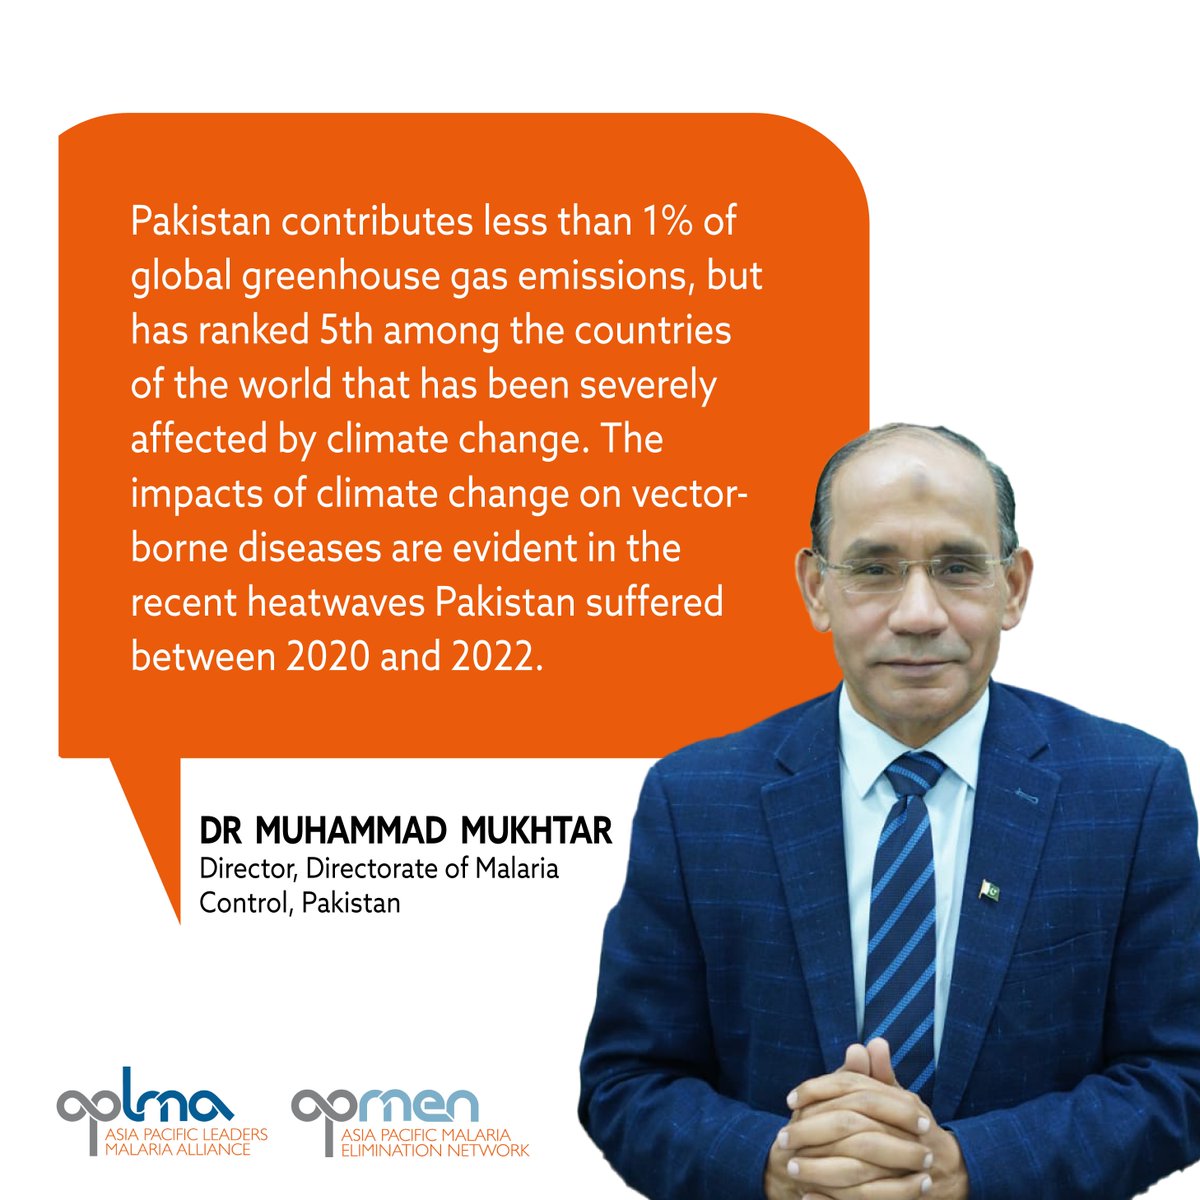 #ClimateChange unequally exacerbates malaria risks, with developing countries like #Pakistan hit hardest. On #WorldMalariaDay we must #AccelerateTheFight to #EndMalaria and achieve #HealthEquity 🚫🦟🌏